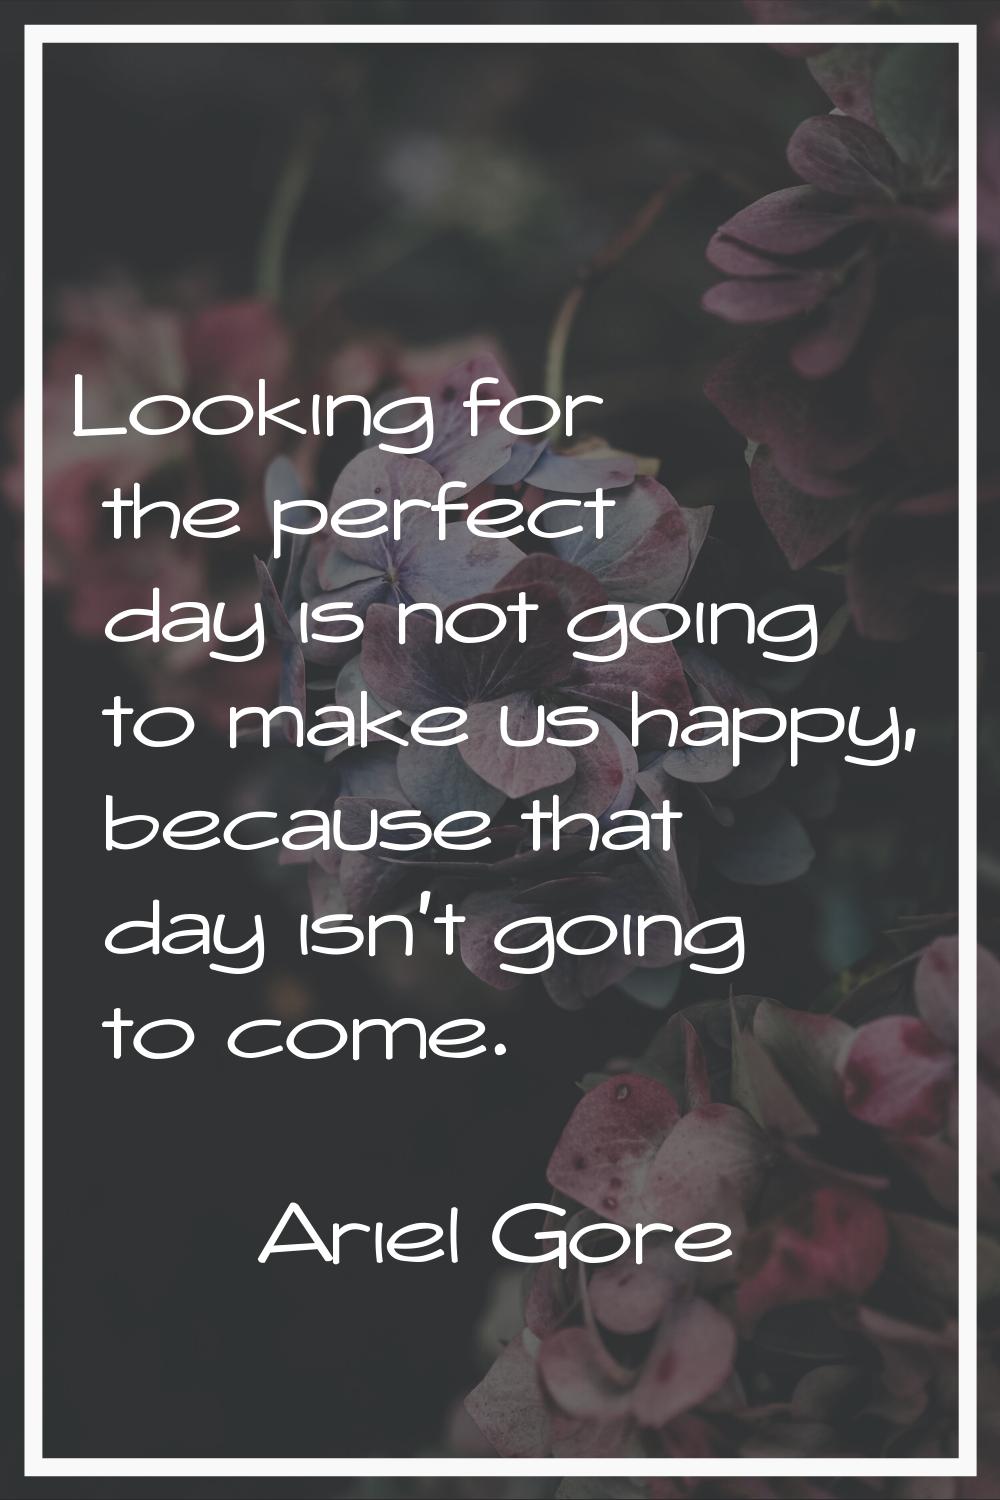 Looking for the perfect day is not going to make us happy, because that day isn't going to come.